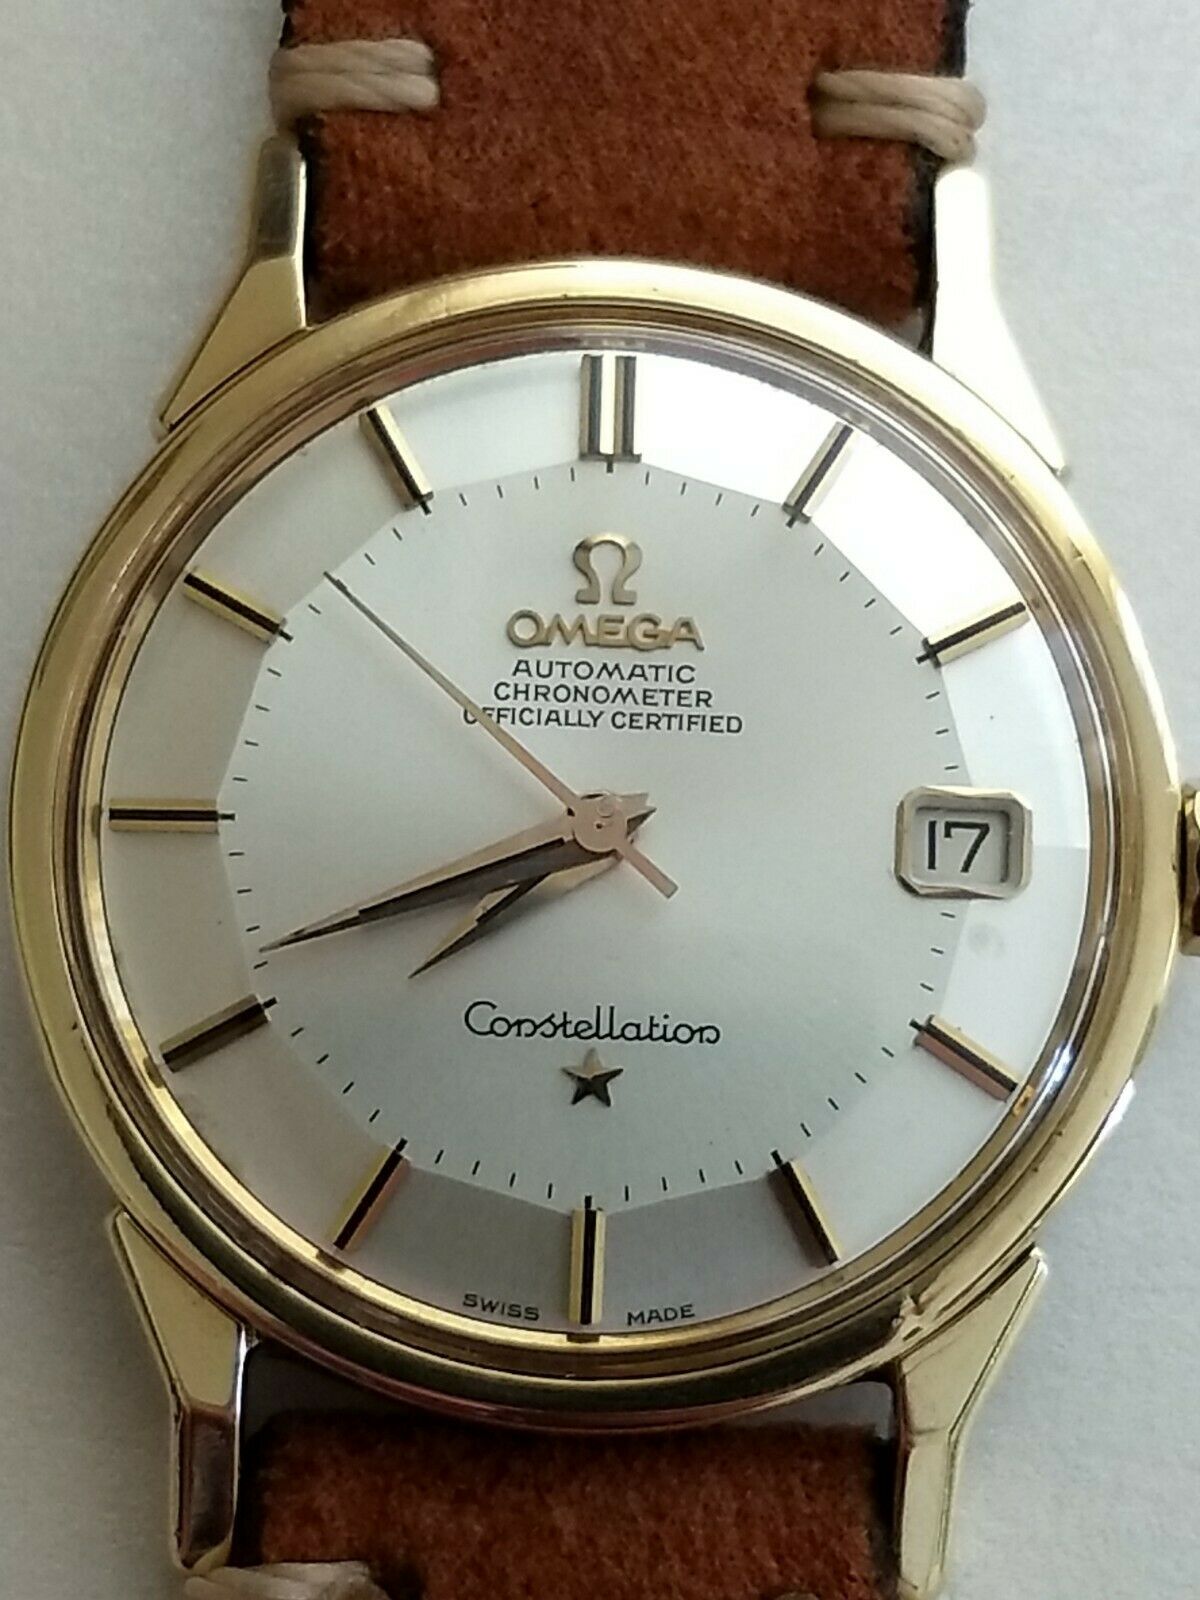 Surprising good condition 1960s Omega 